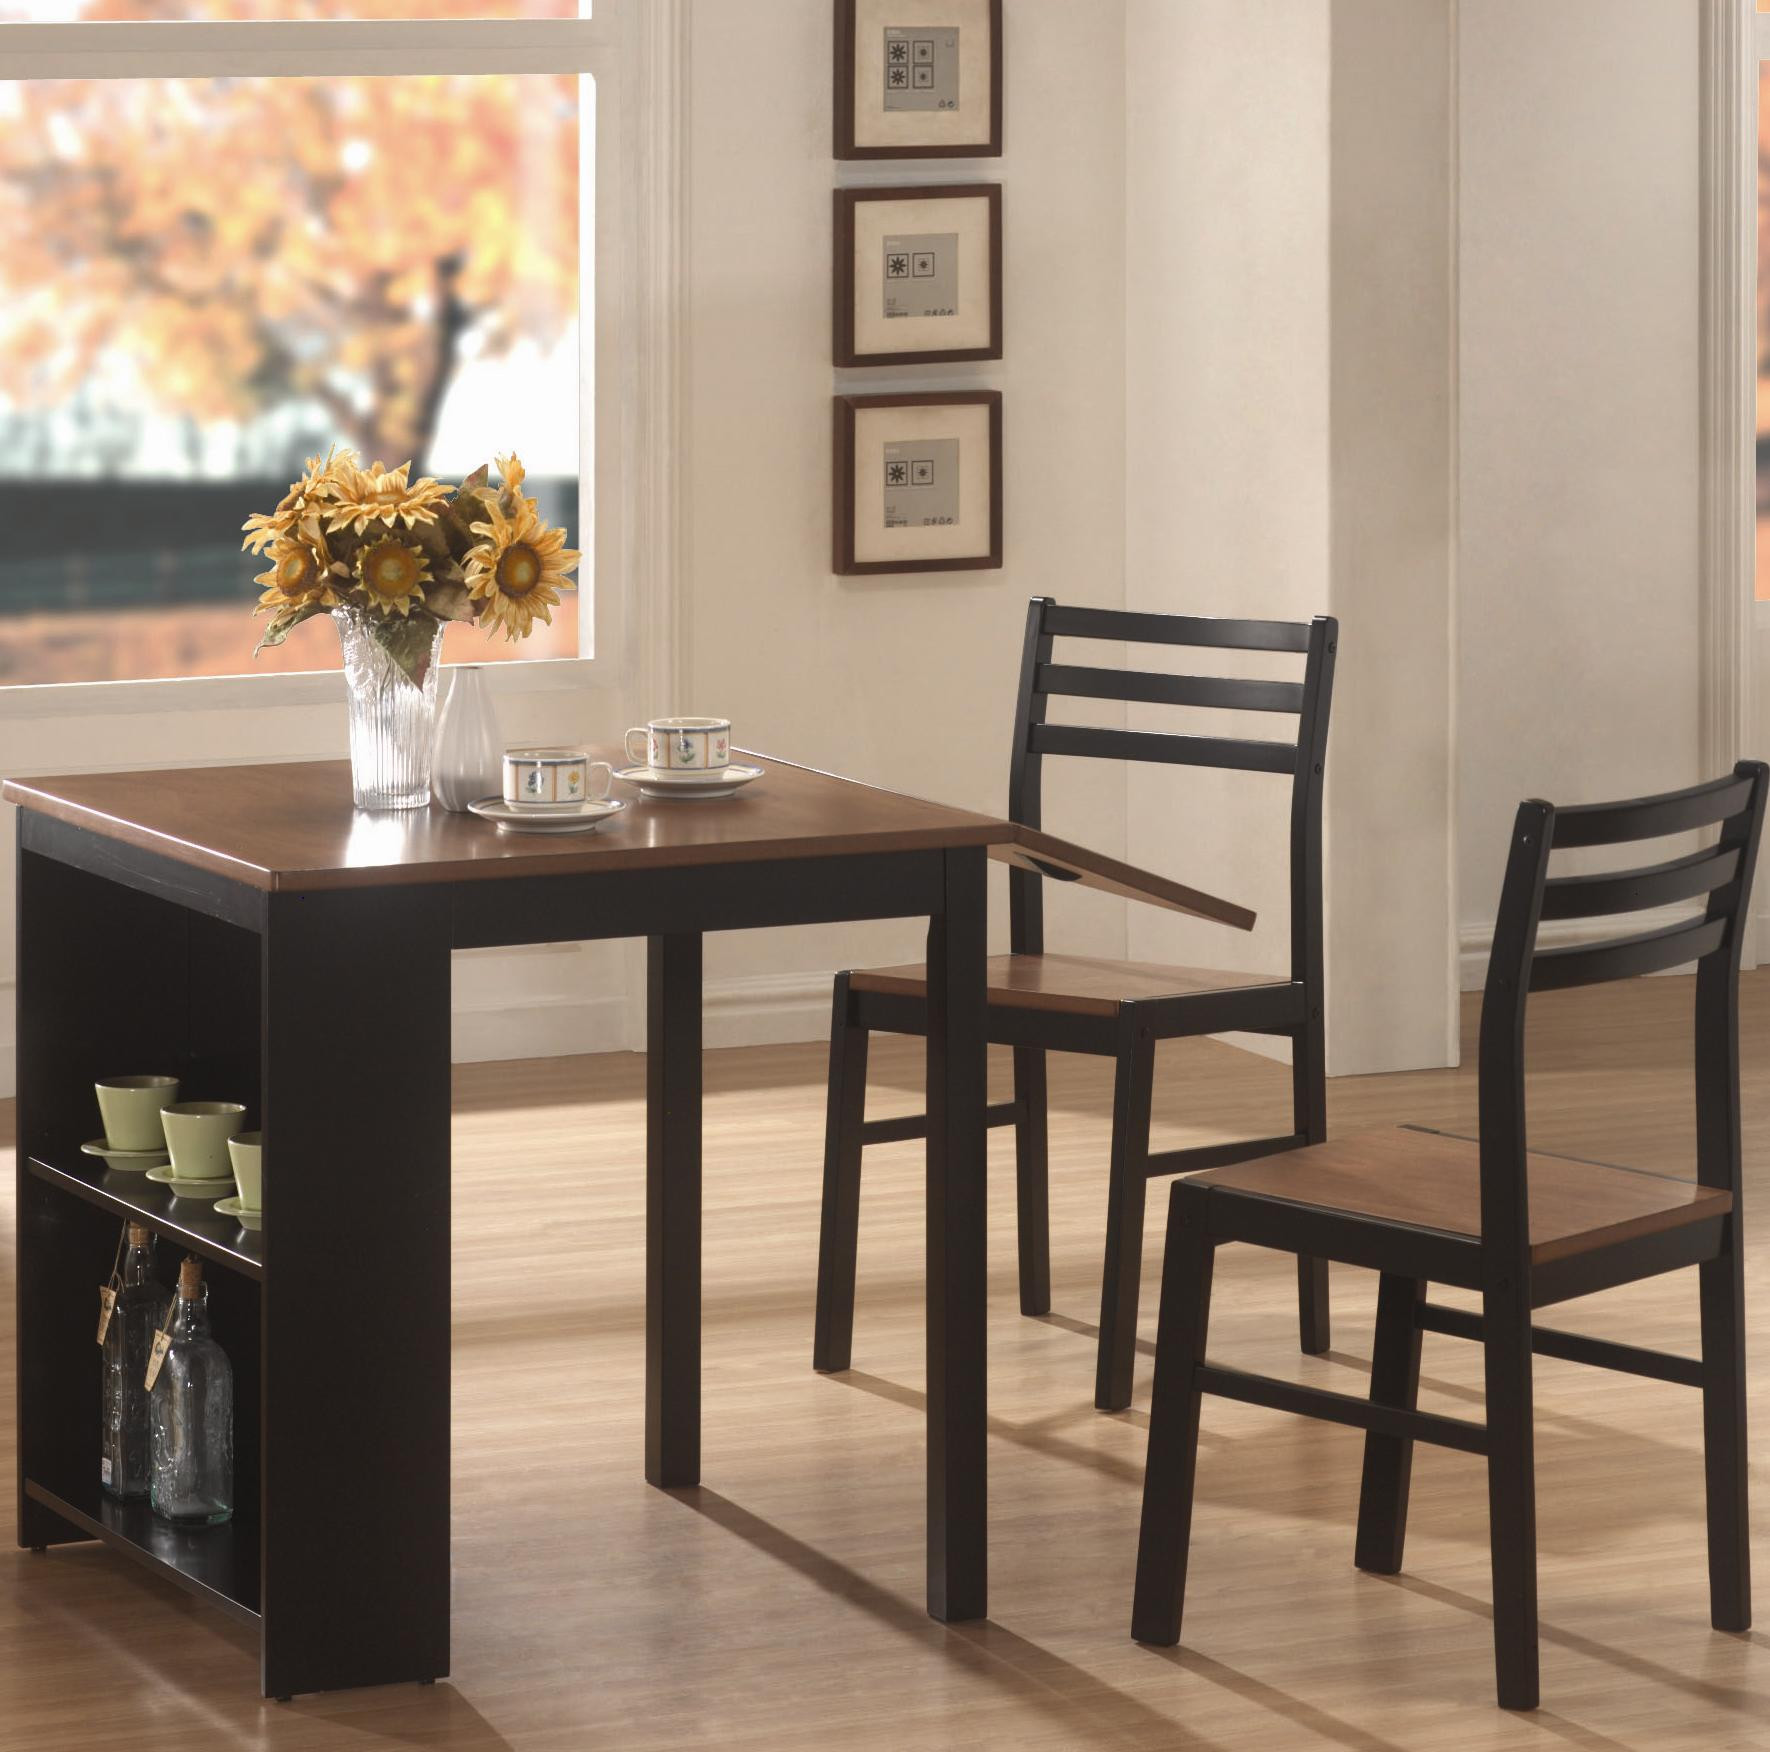 Dinette Set For Small Kitchen
 Awesome Small Dining Sets 2 Small Kitchen Table Sets